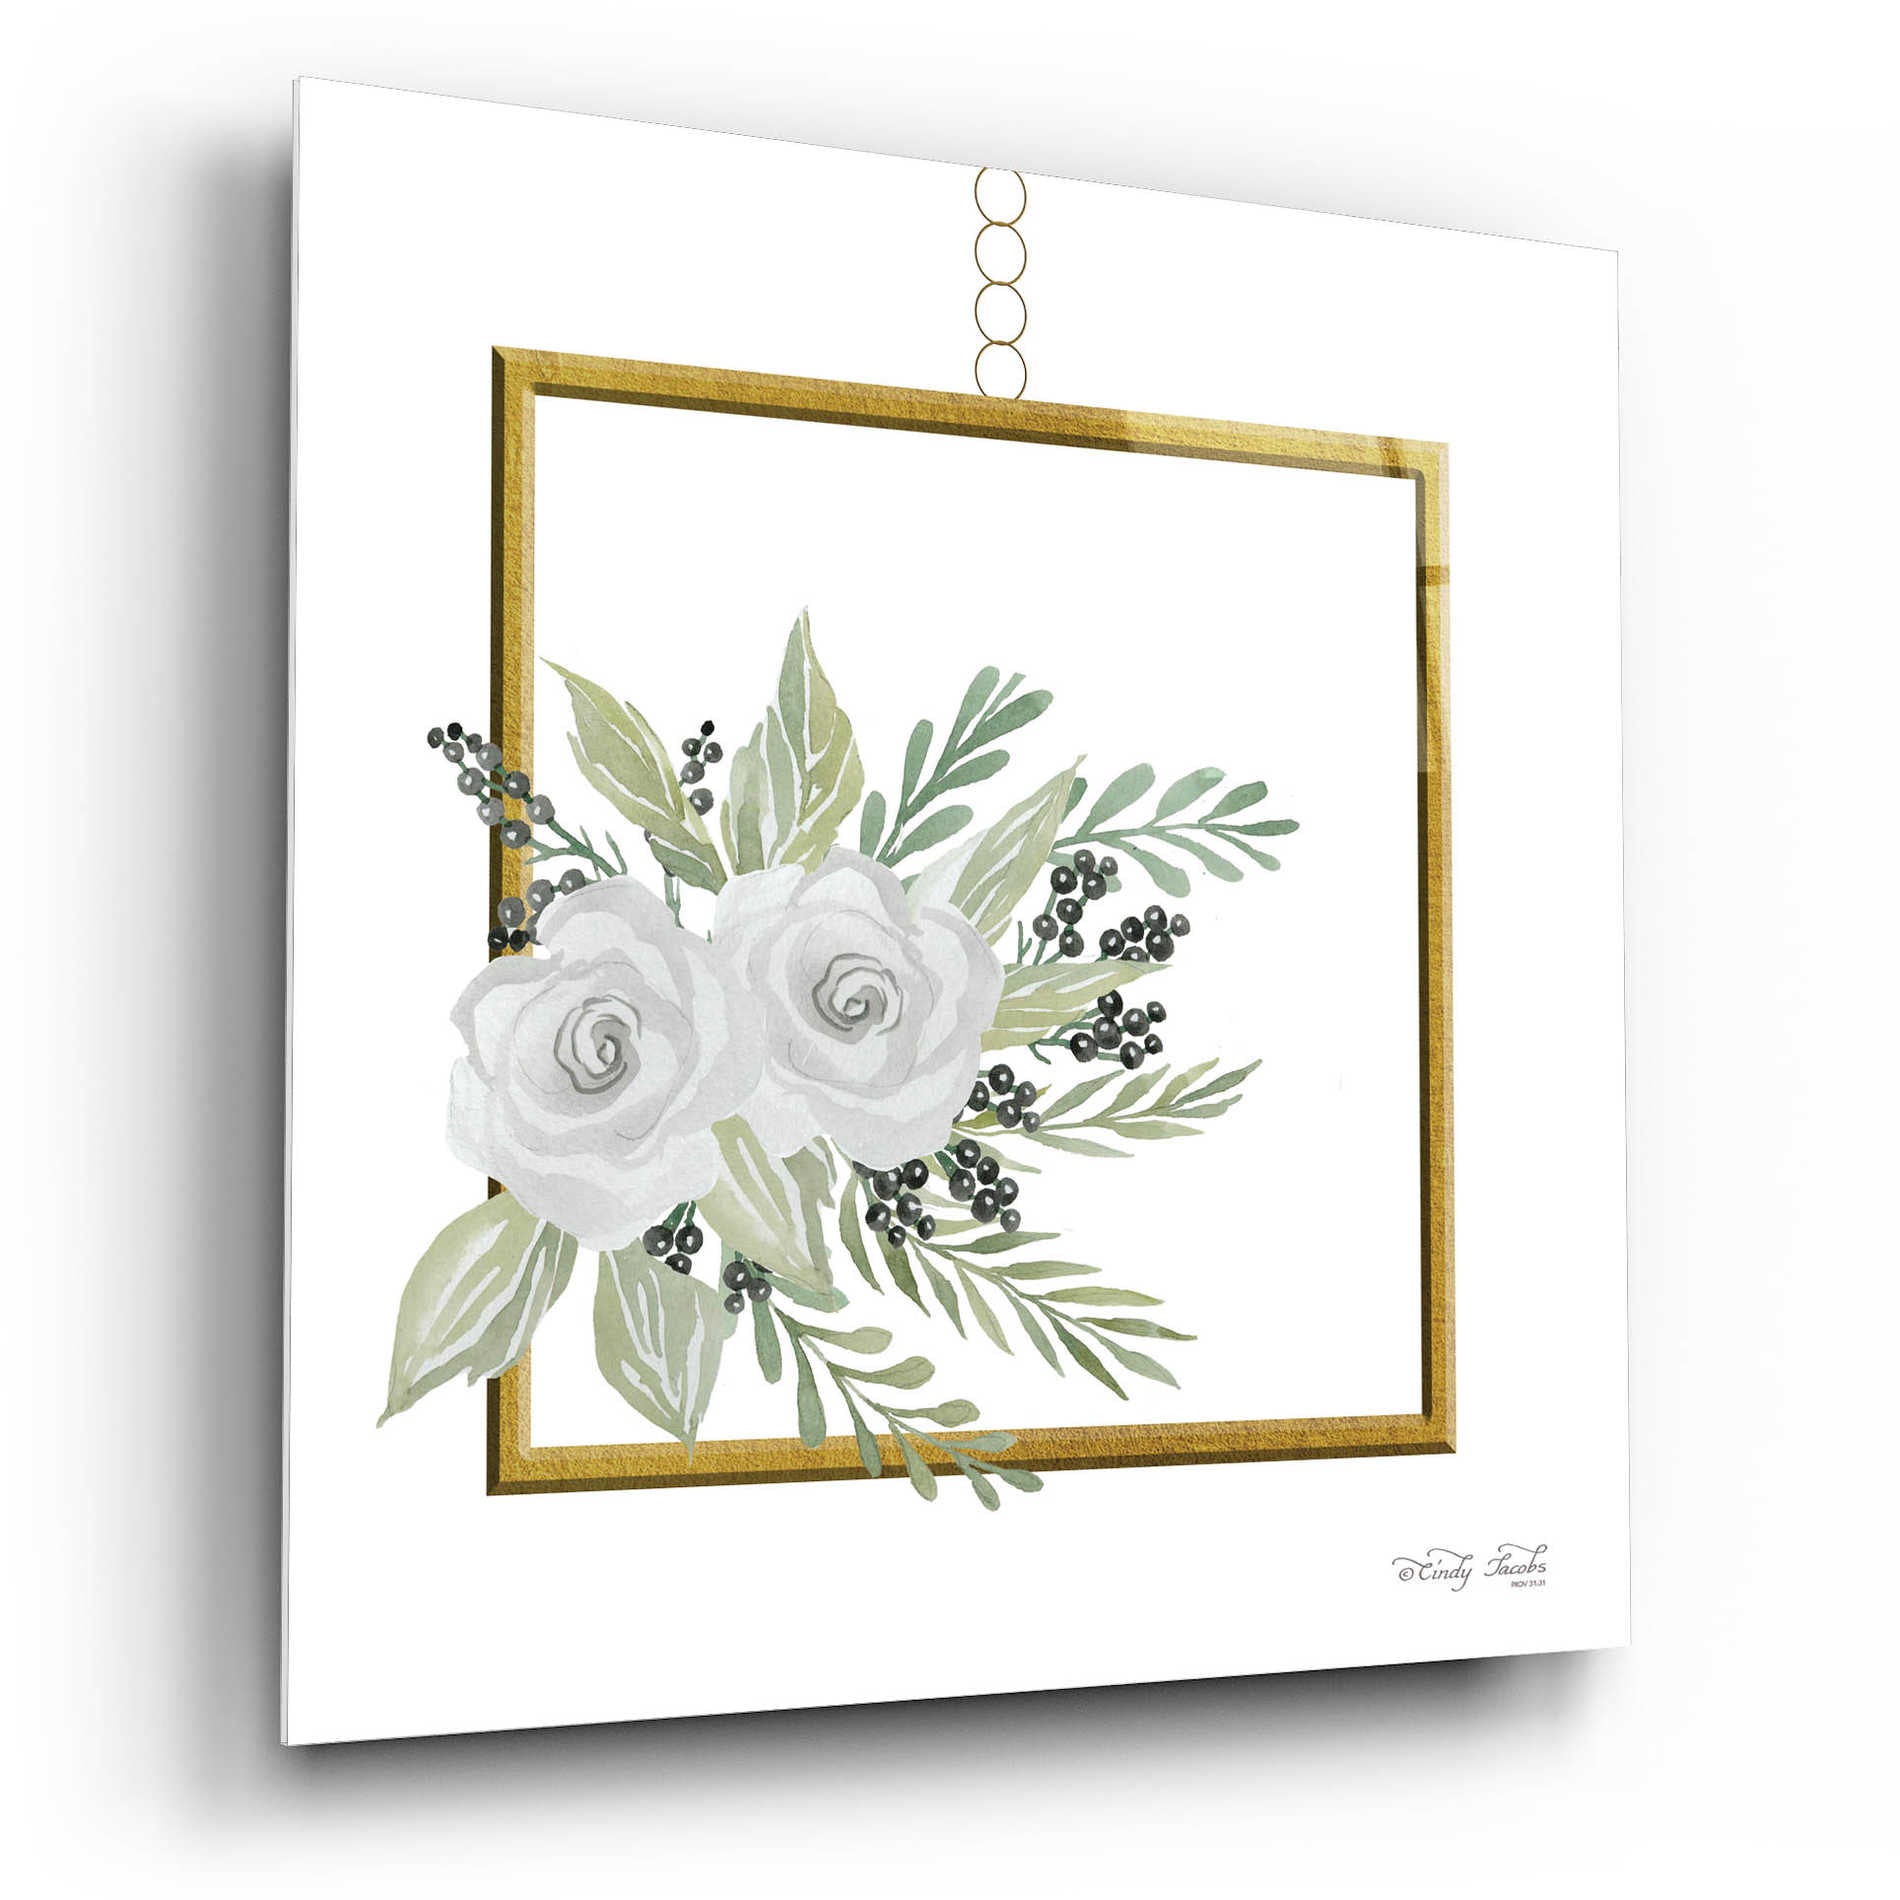 Epic Art 'Geometric Square Muted Floral' by Cindy Jacobs, Acrylic Glass Wall Art,12x12